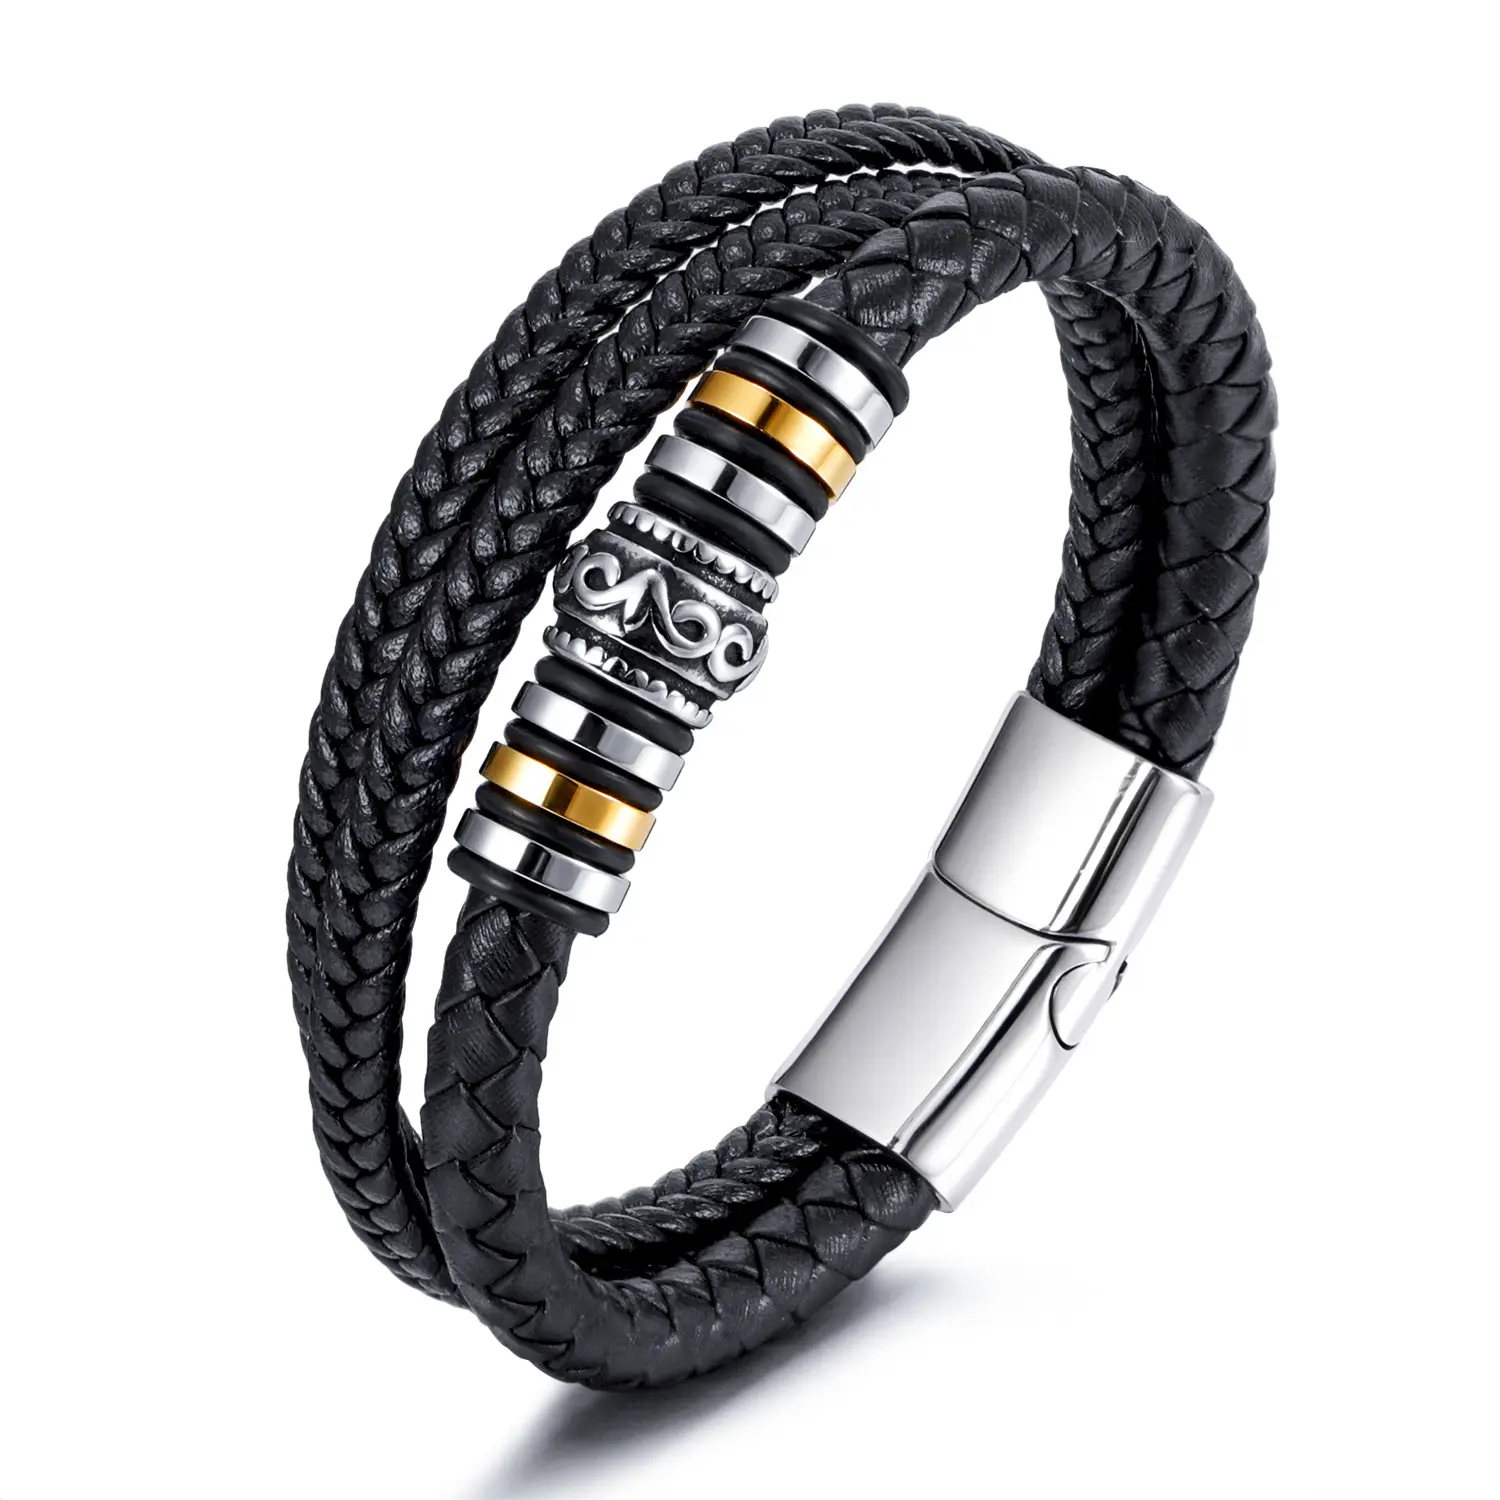 Fashion Stainless Steel Charm Magnetic Black Men Bracelet Leather Genuine Braided Punk Rock Bangles Jewelry